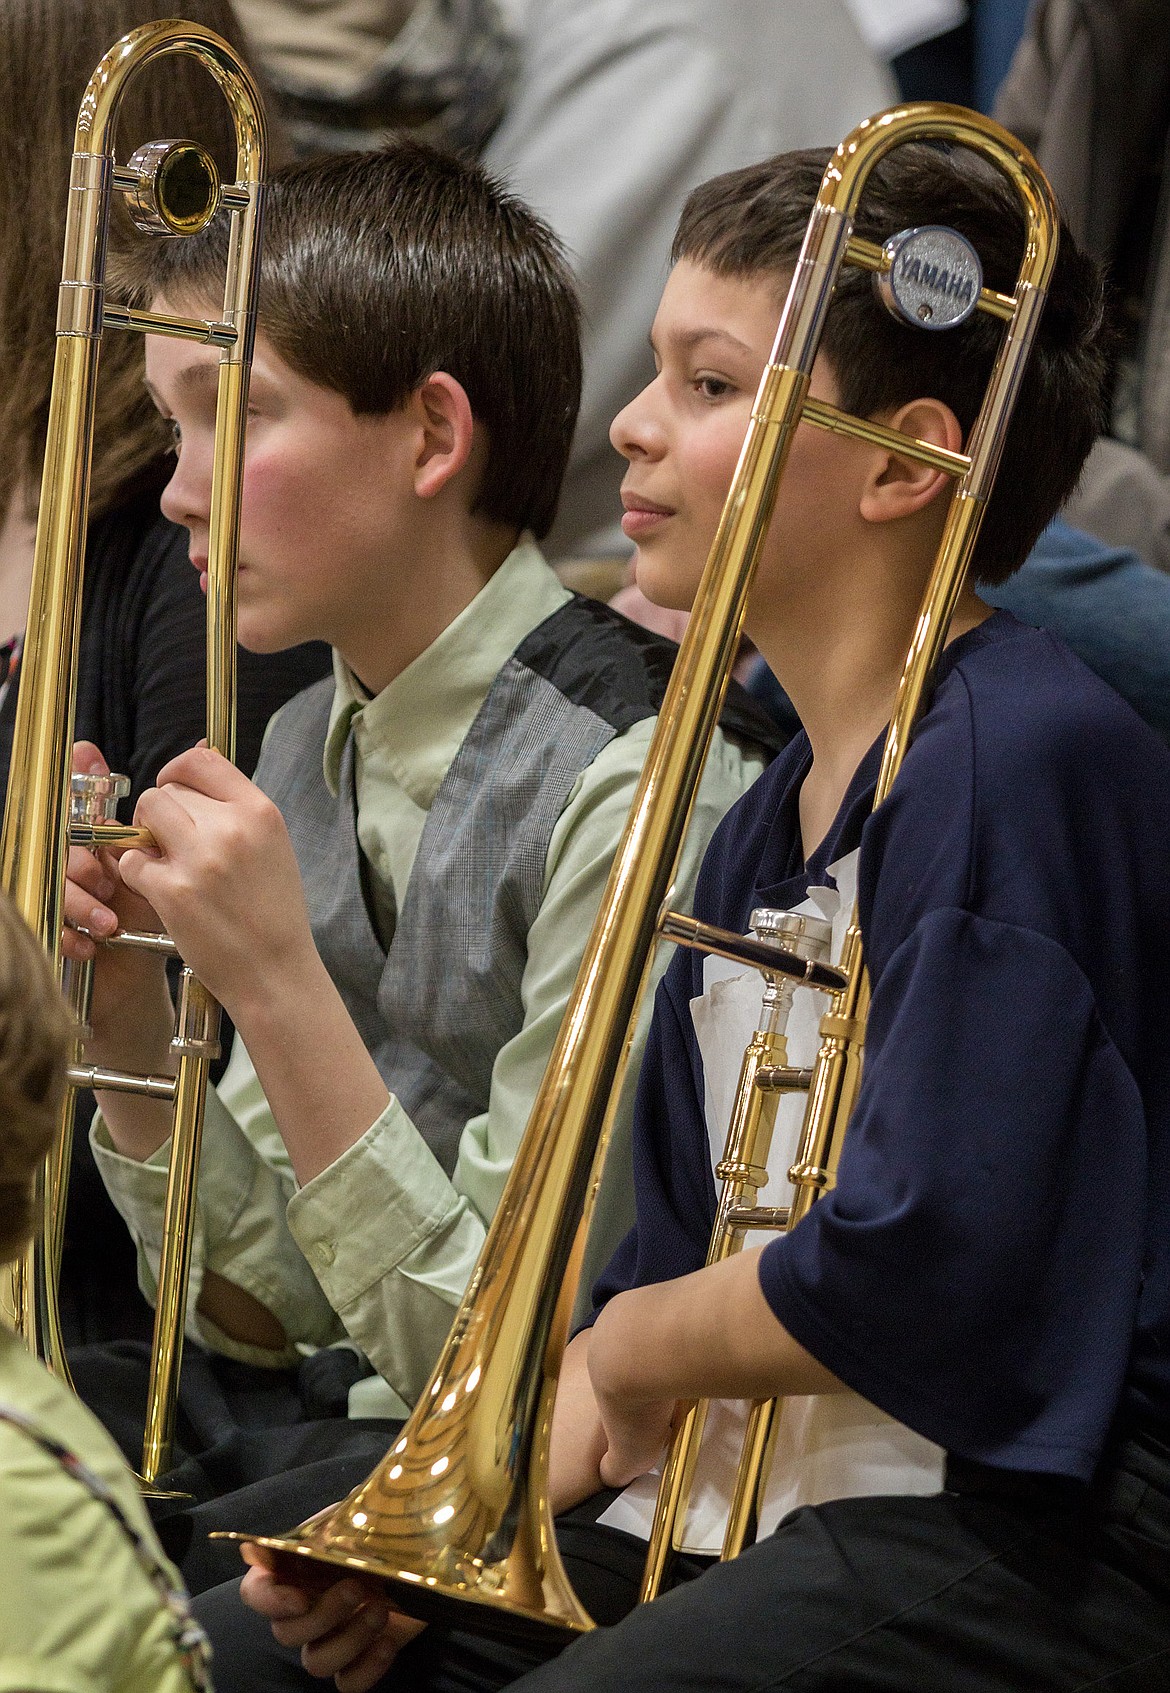 Libby sixth graders Zach Leary, left, and Jason Quintanilla sit with their trombones while waiting to perform in the Libby Elementary School gym on Tuesday, March 27, 2018. (John Blodgett/The Western News)